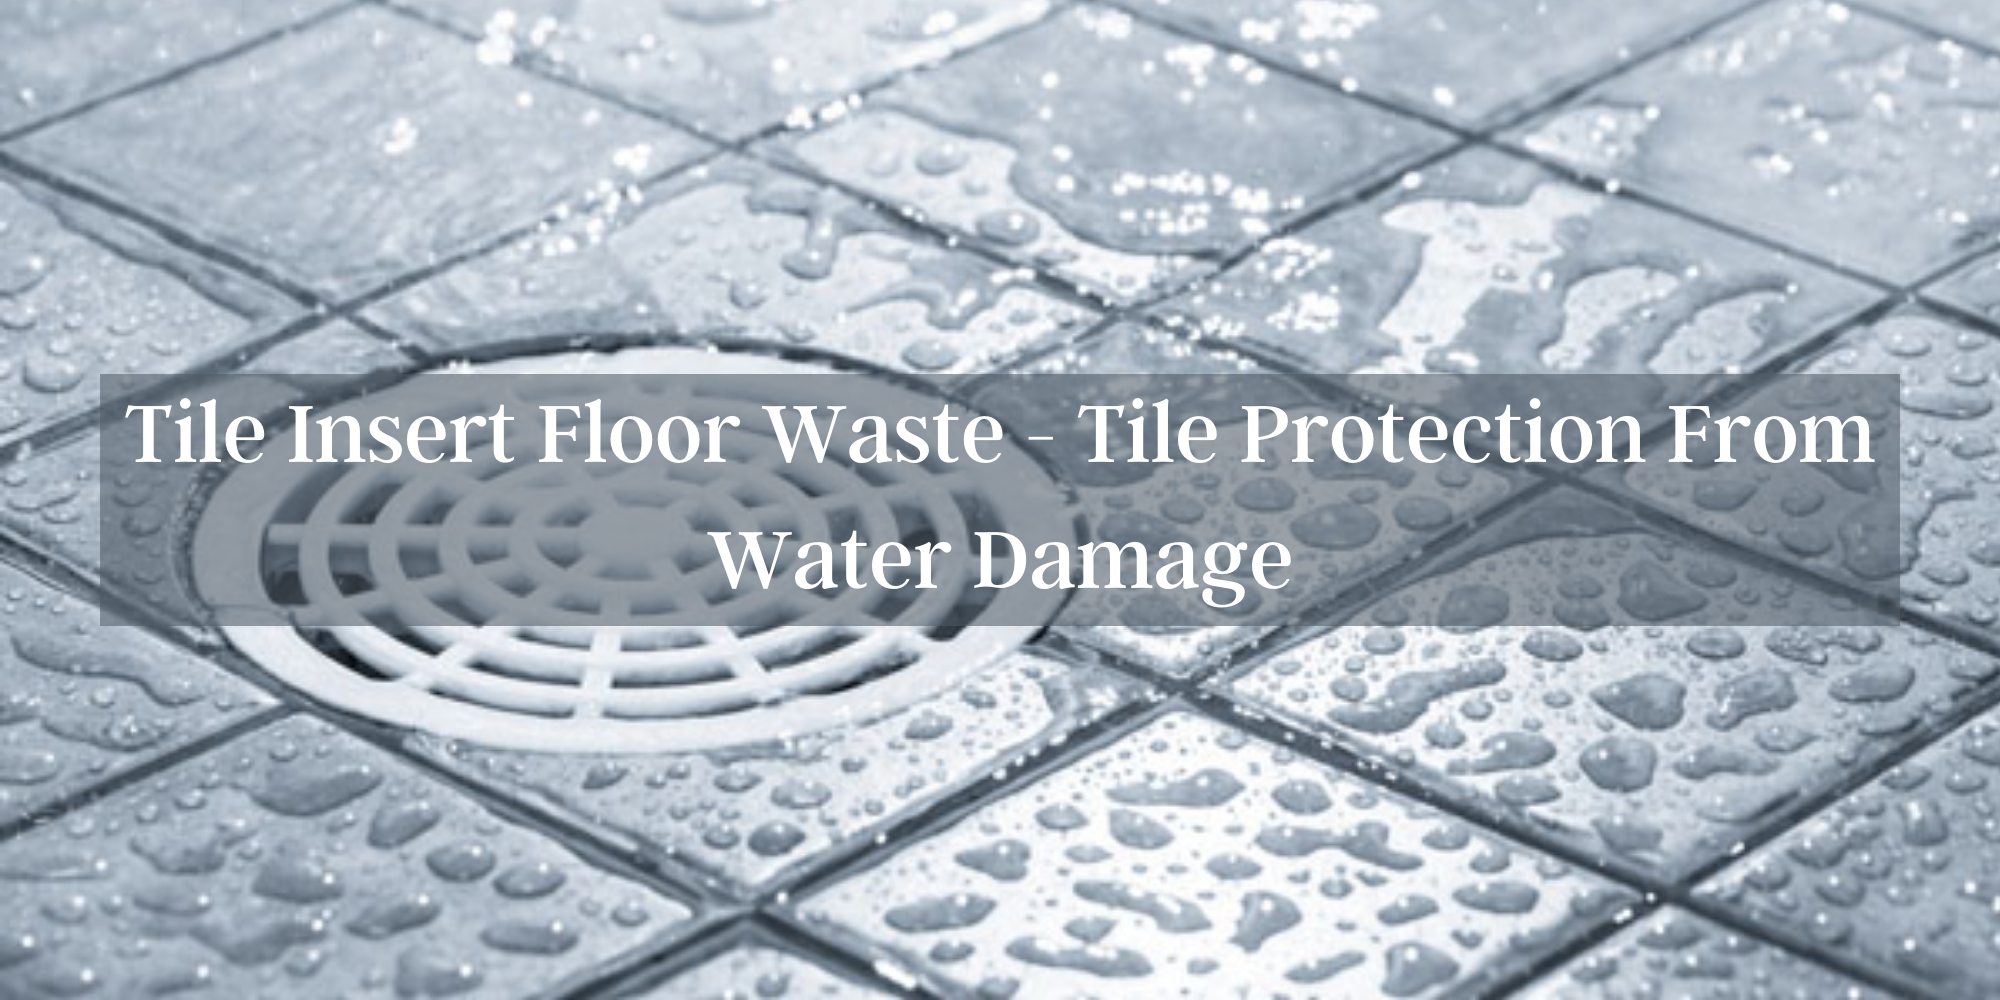 Tile Insert Floor Waste: Tile Protection From Water Damage